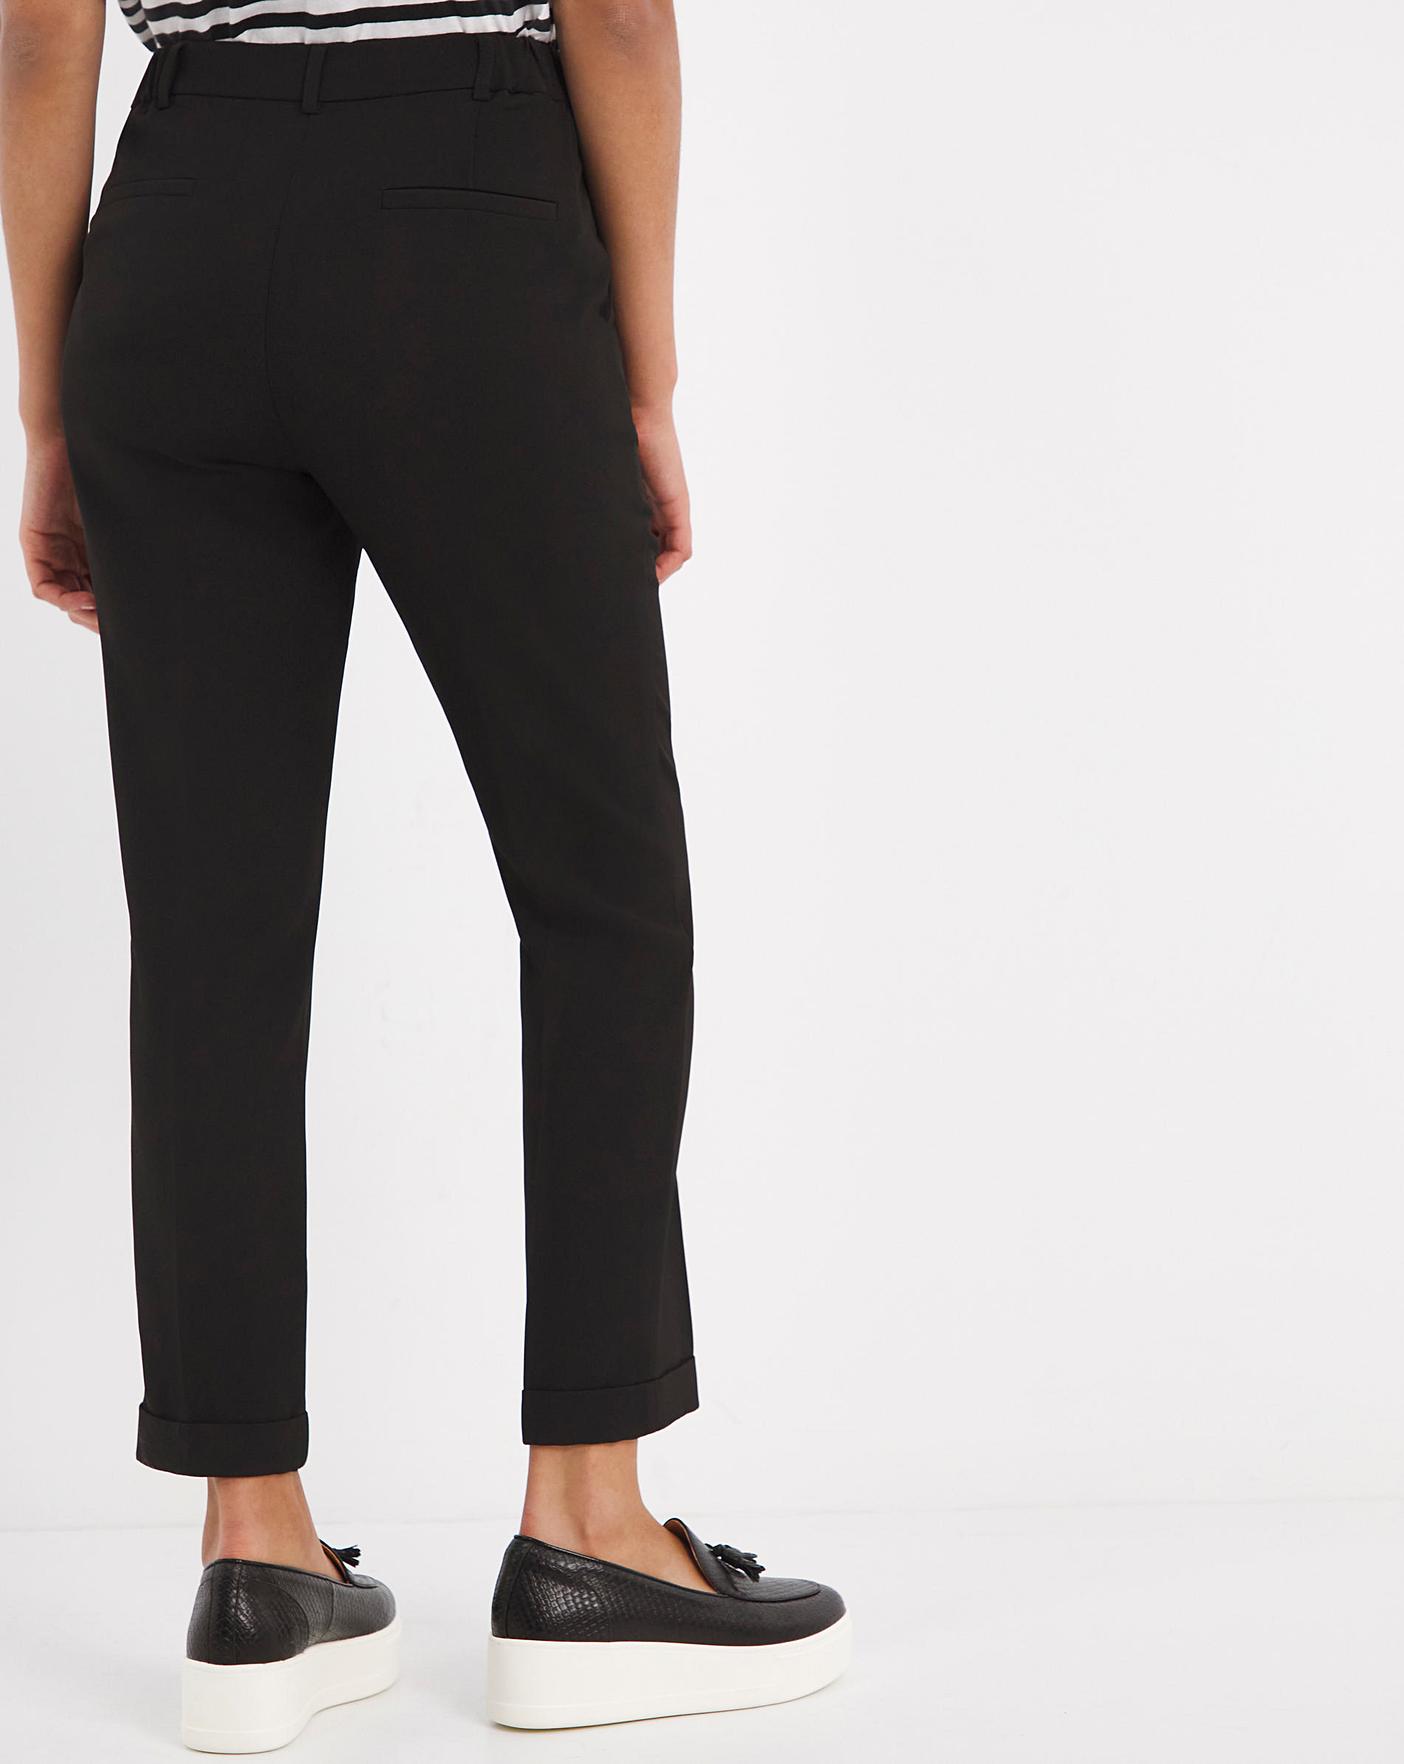 Buy MANGO Women Black Solid Smart Casual Ankle Length Trousers - Trousers  for Women 2037996 | Myntra